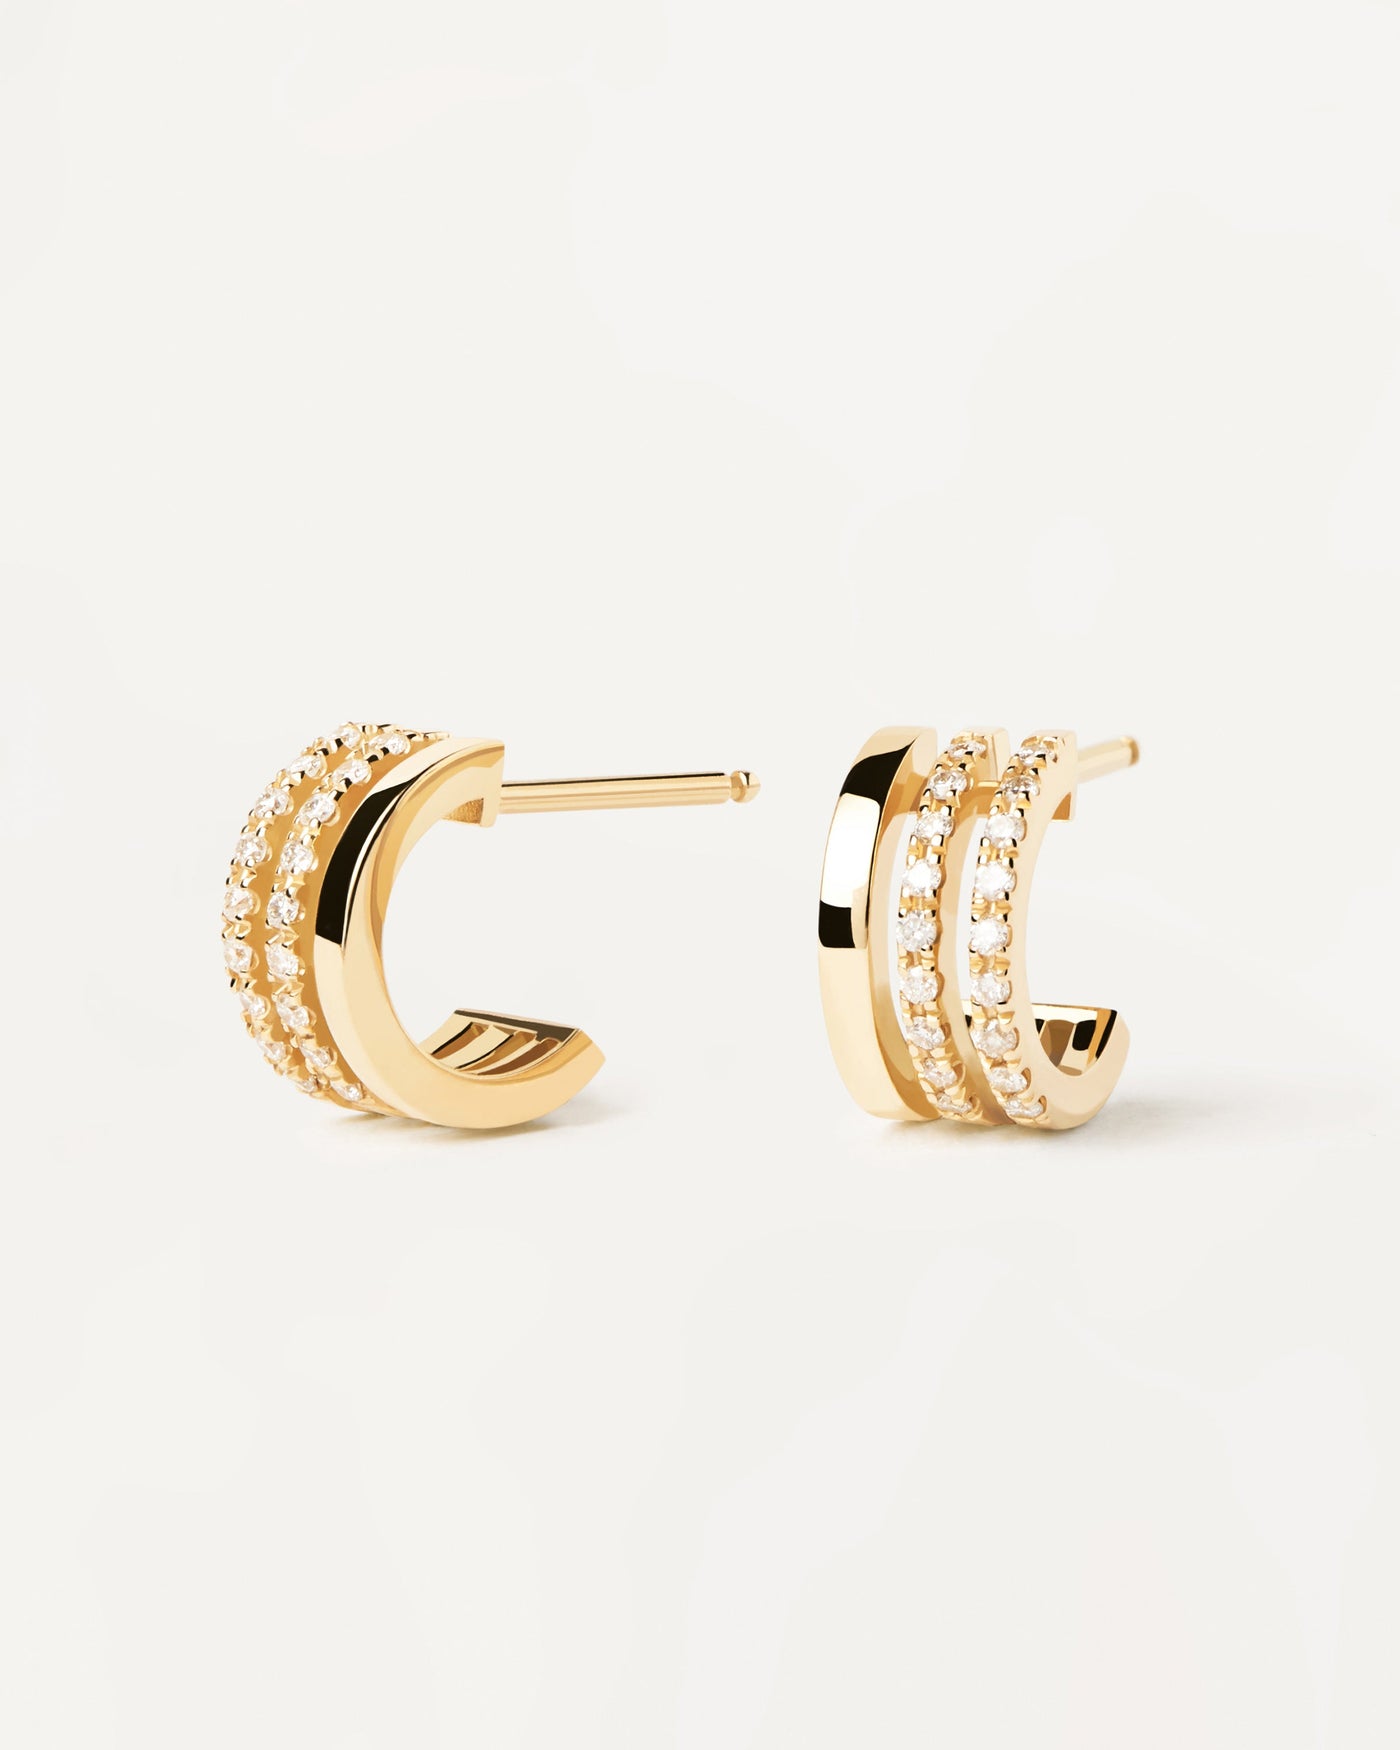 2023 Selection | Diamonds And Gold Triple Hoops. 18K yellow gold earrings with 3 half hoops: one plain & two with diamonds of 0.18 carat. Get the latest arrival from PDPAOLA. Place your order safely and get this Best Seller. Free Shipping.